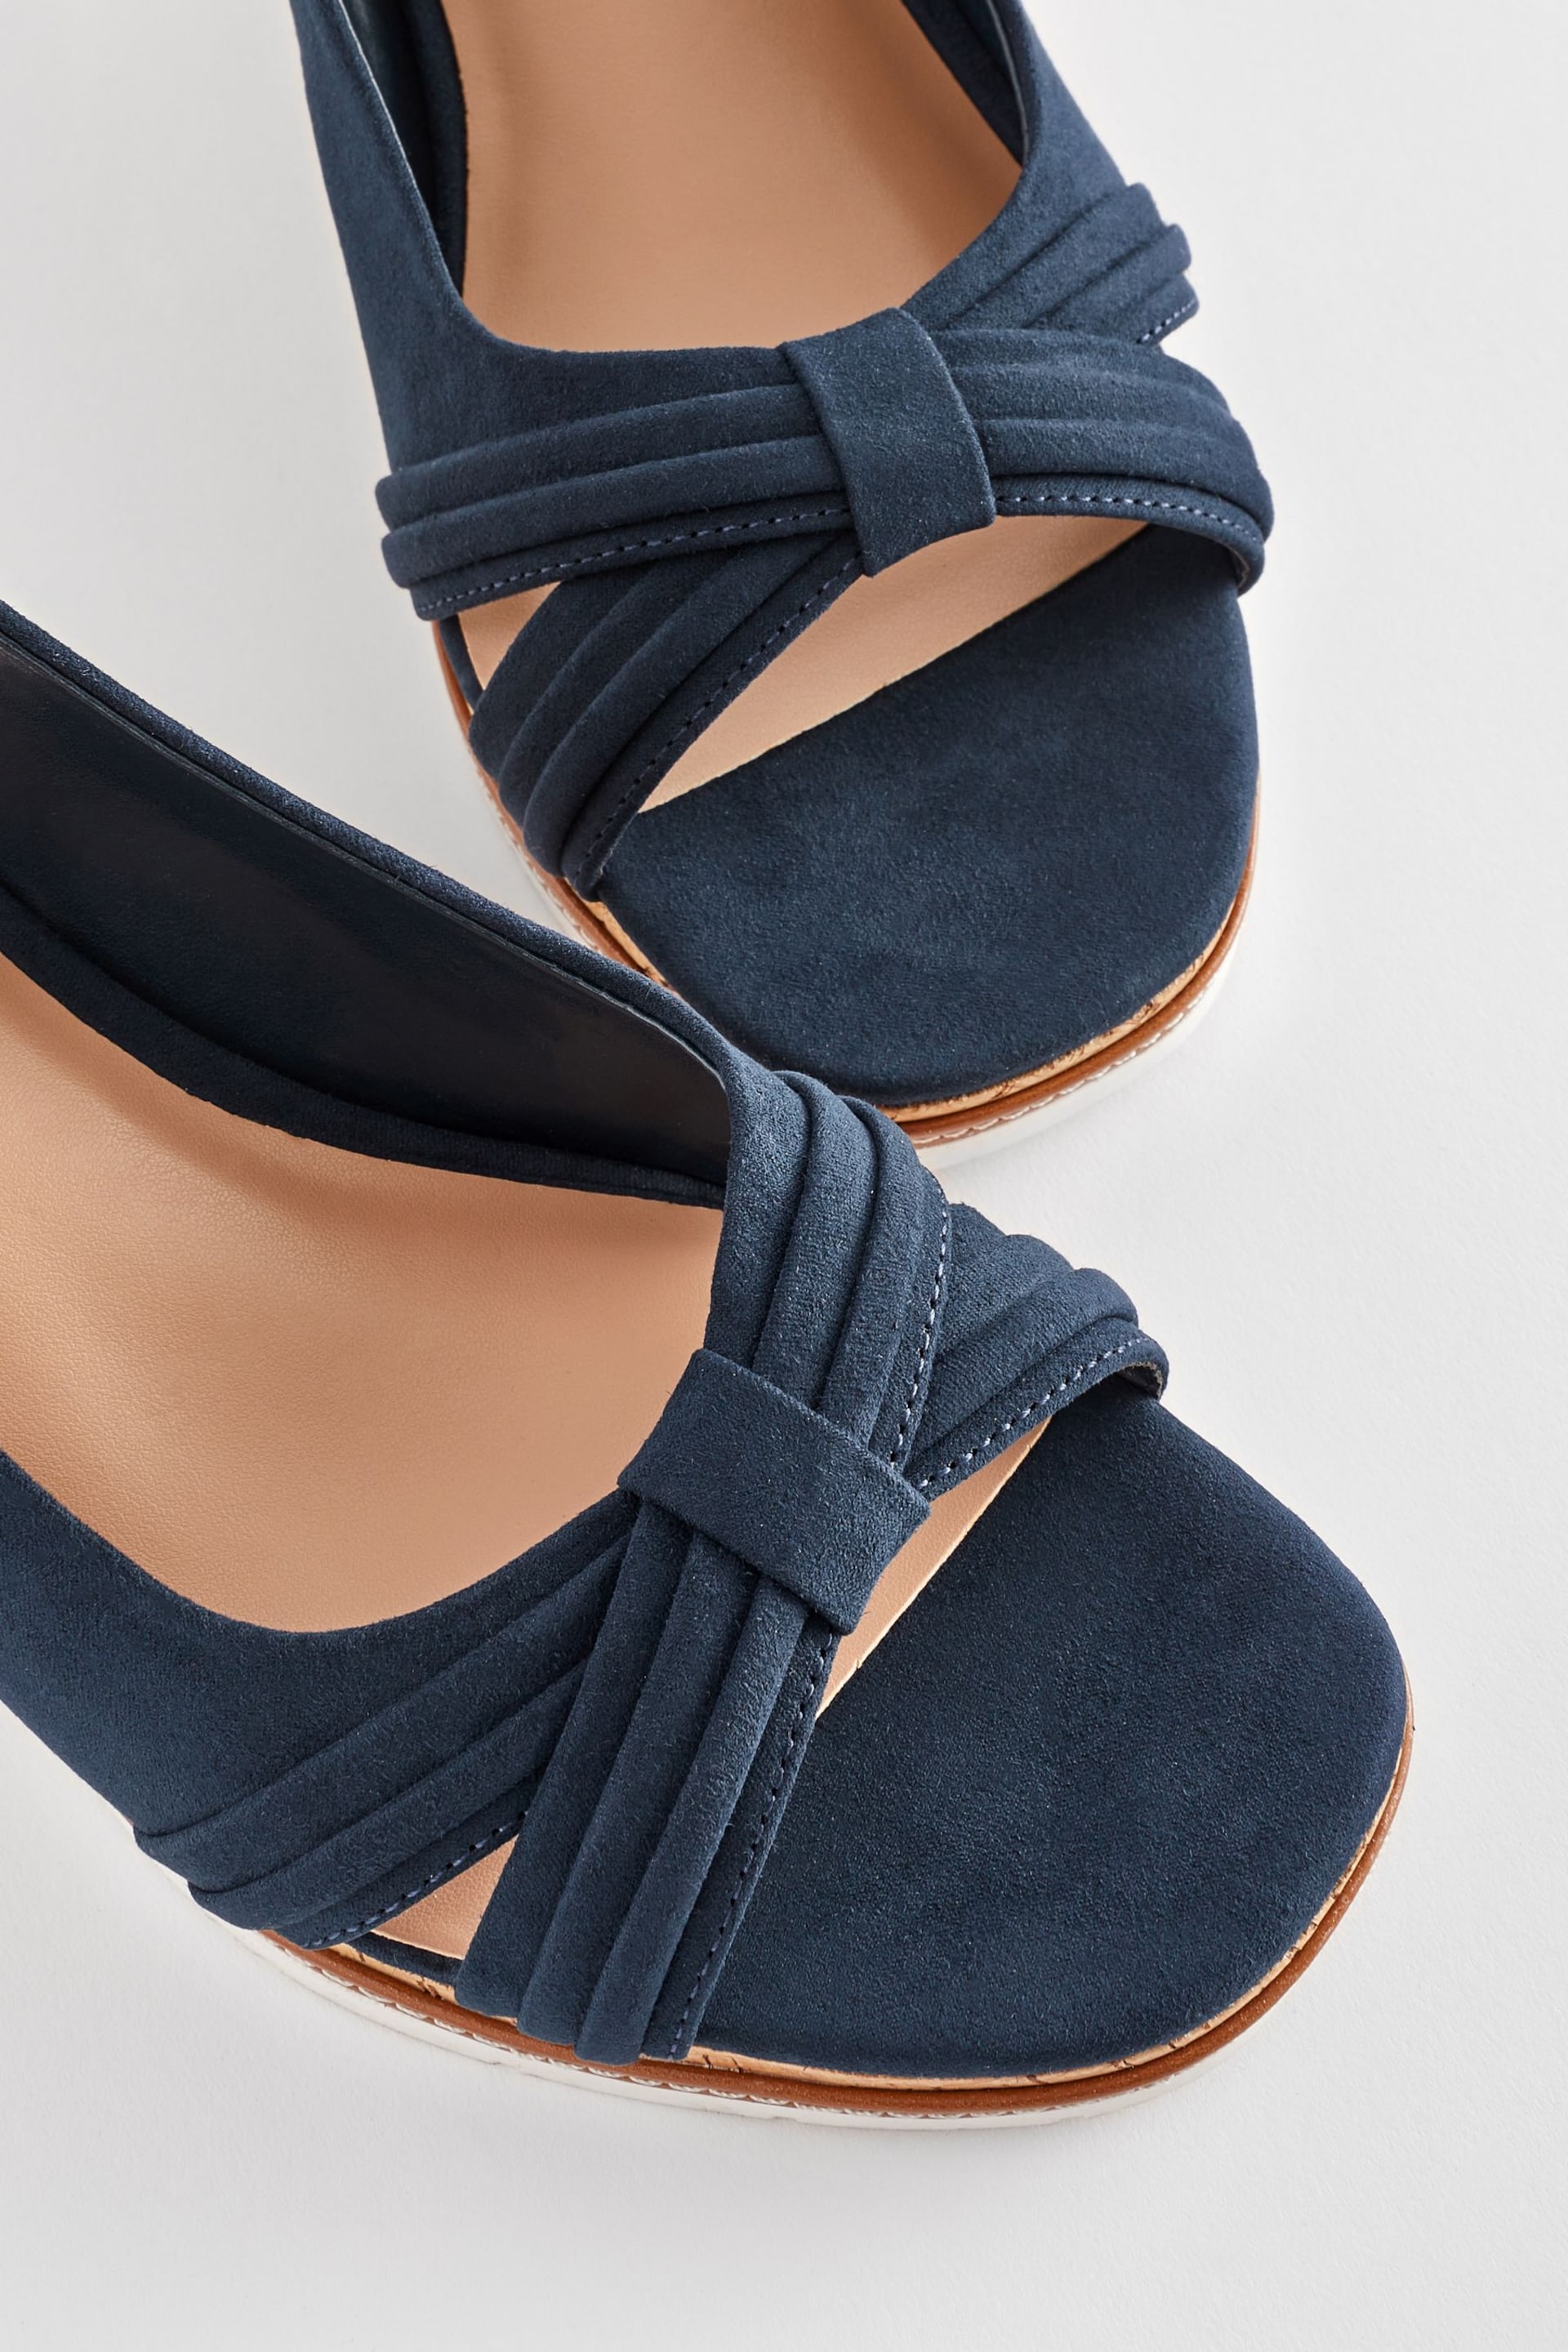 Navy Extra Wide Fit Forever Comfort® Bow Cork Wedges - Image 7 of 8